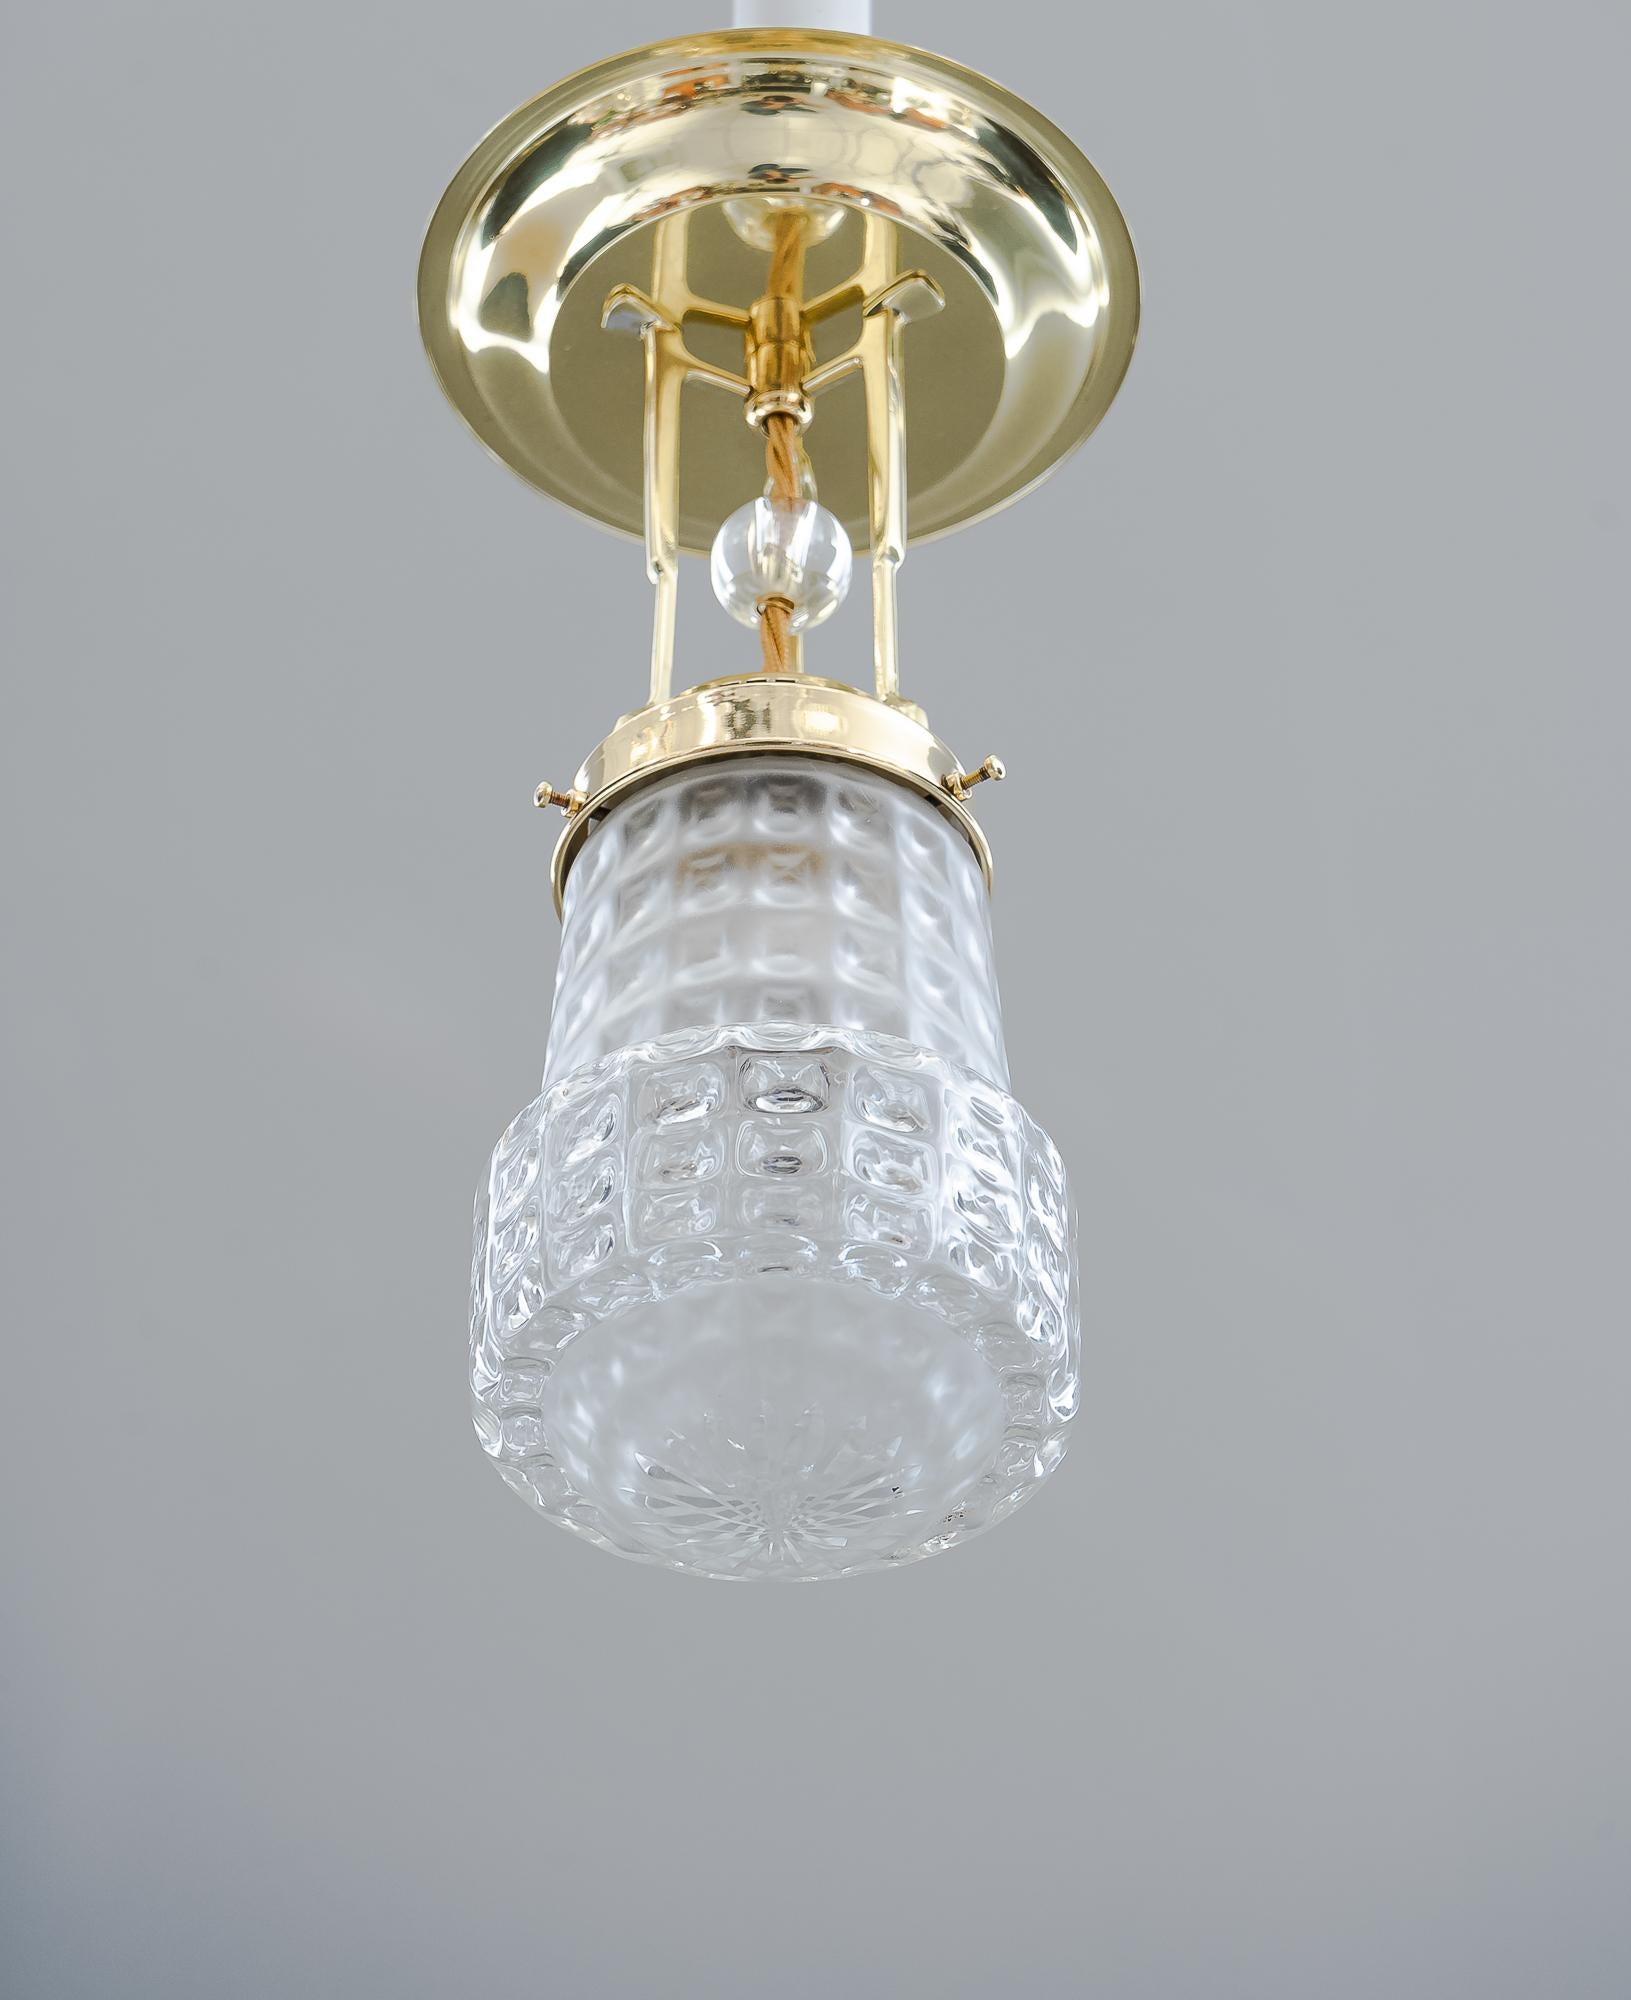 Art Deco ceiling lamp with original glass shade, Vienna, circa 1920s
Polished and stove enameled.